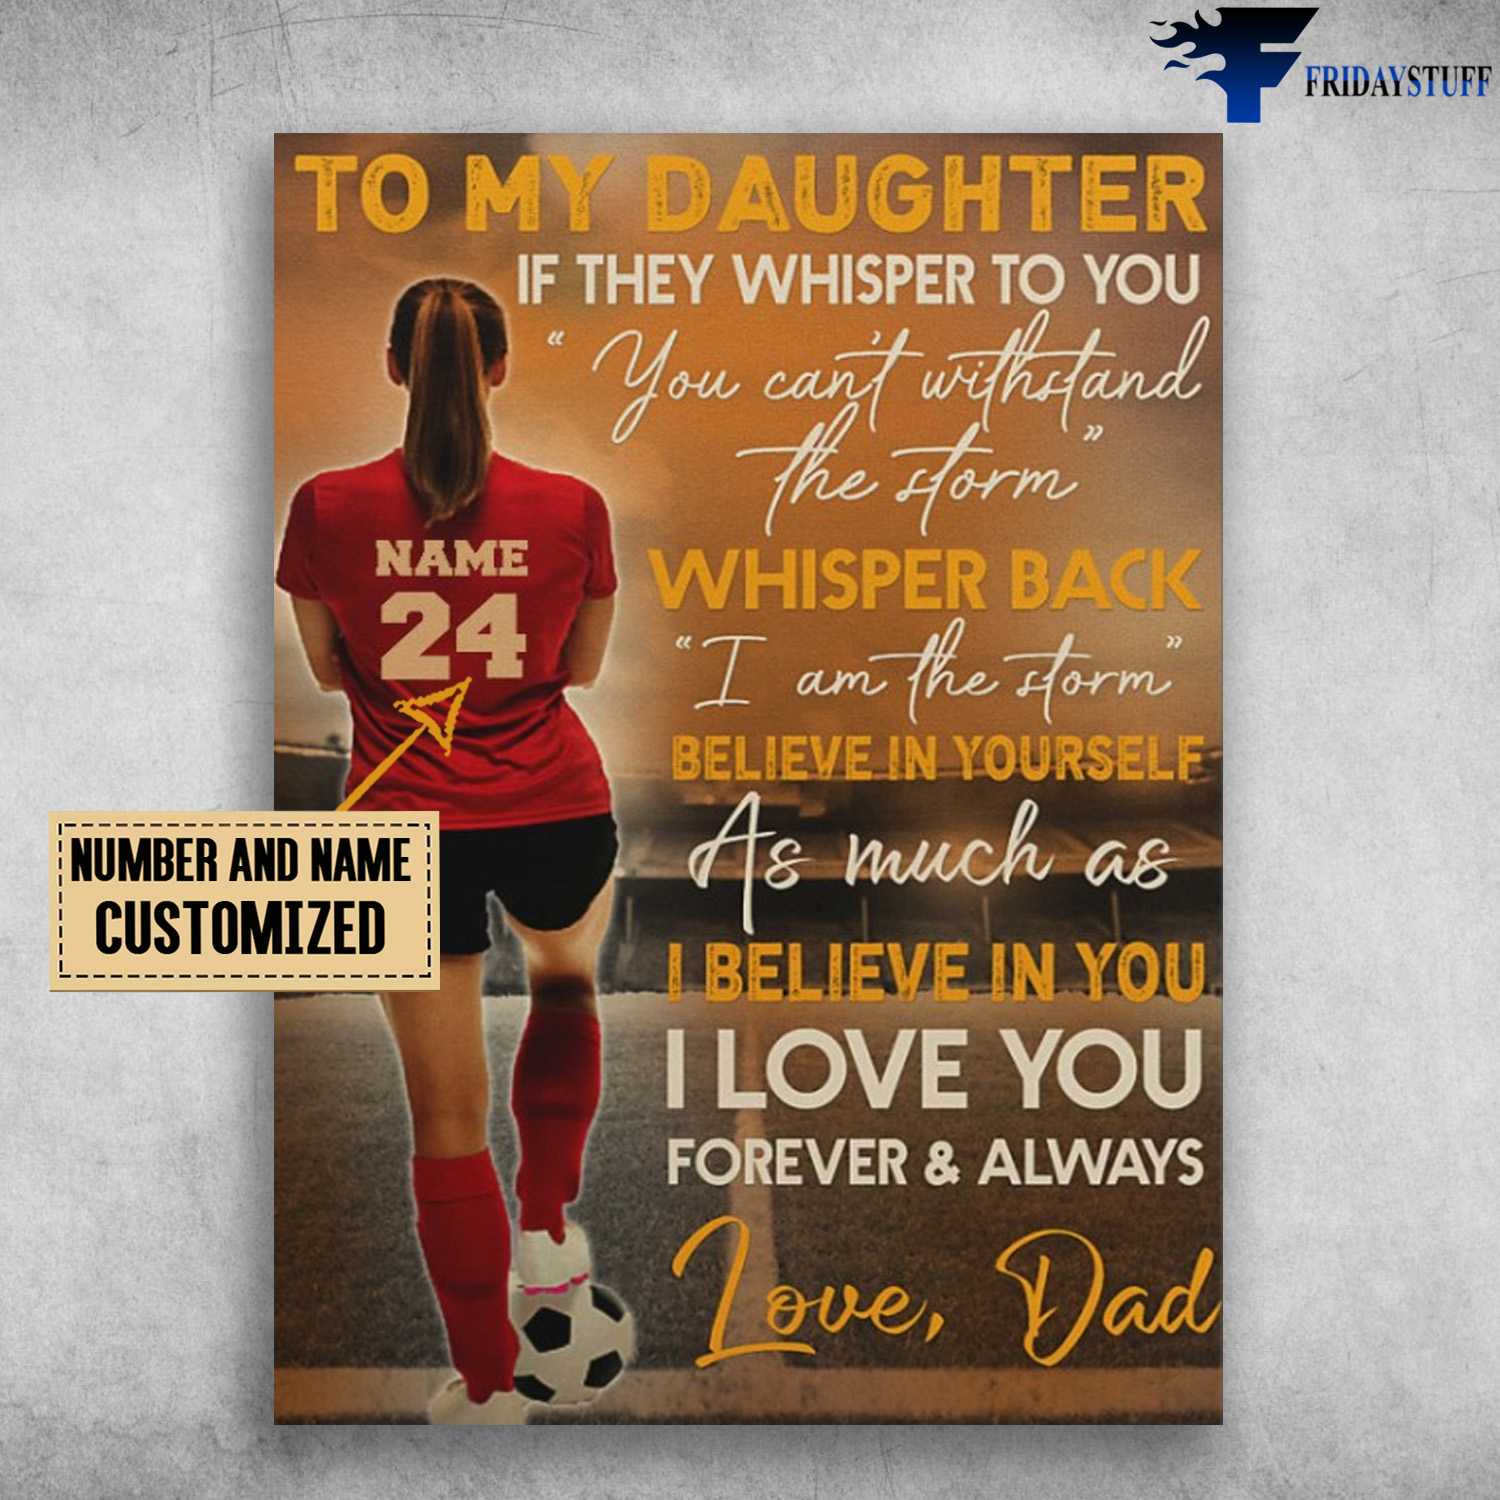 Girl Loves Soccer, American Soccer, Dad And Daughter, If They Whisper You, You Can't Withstand The Form, Whisper Back, I Am The Storm, Believe In Yourself